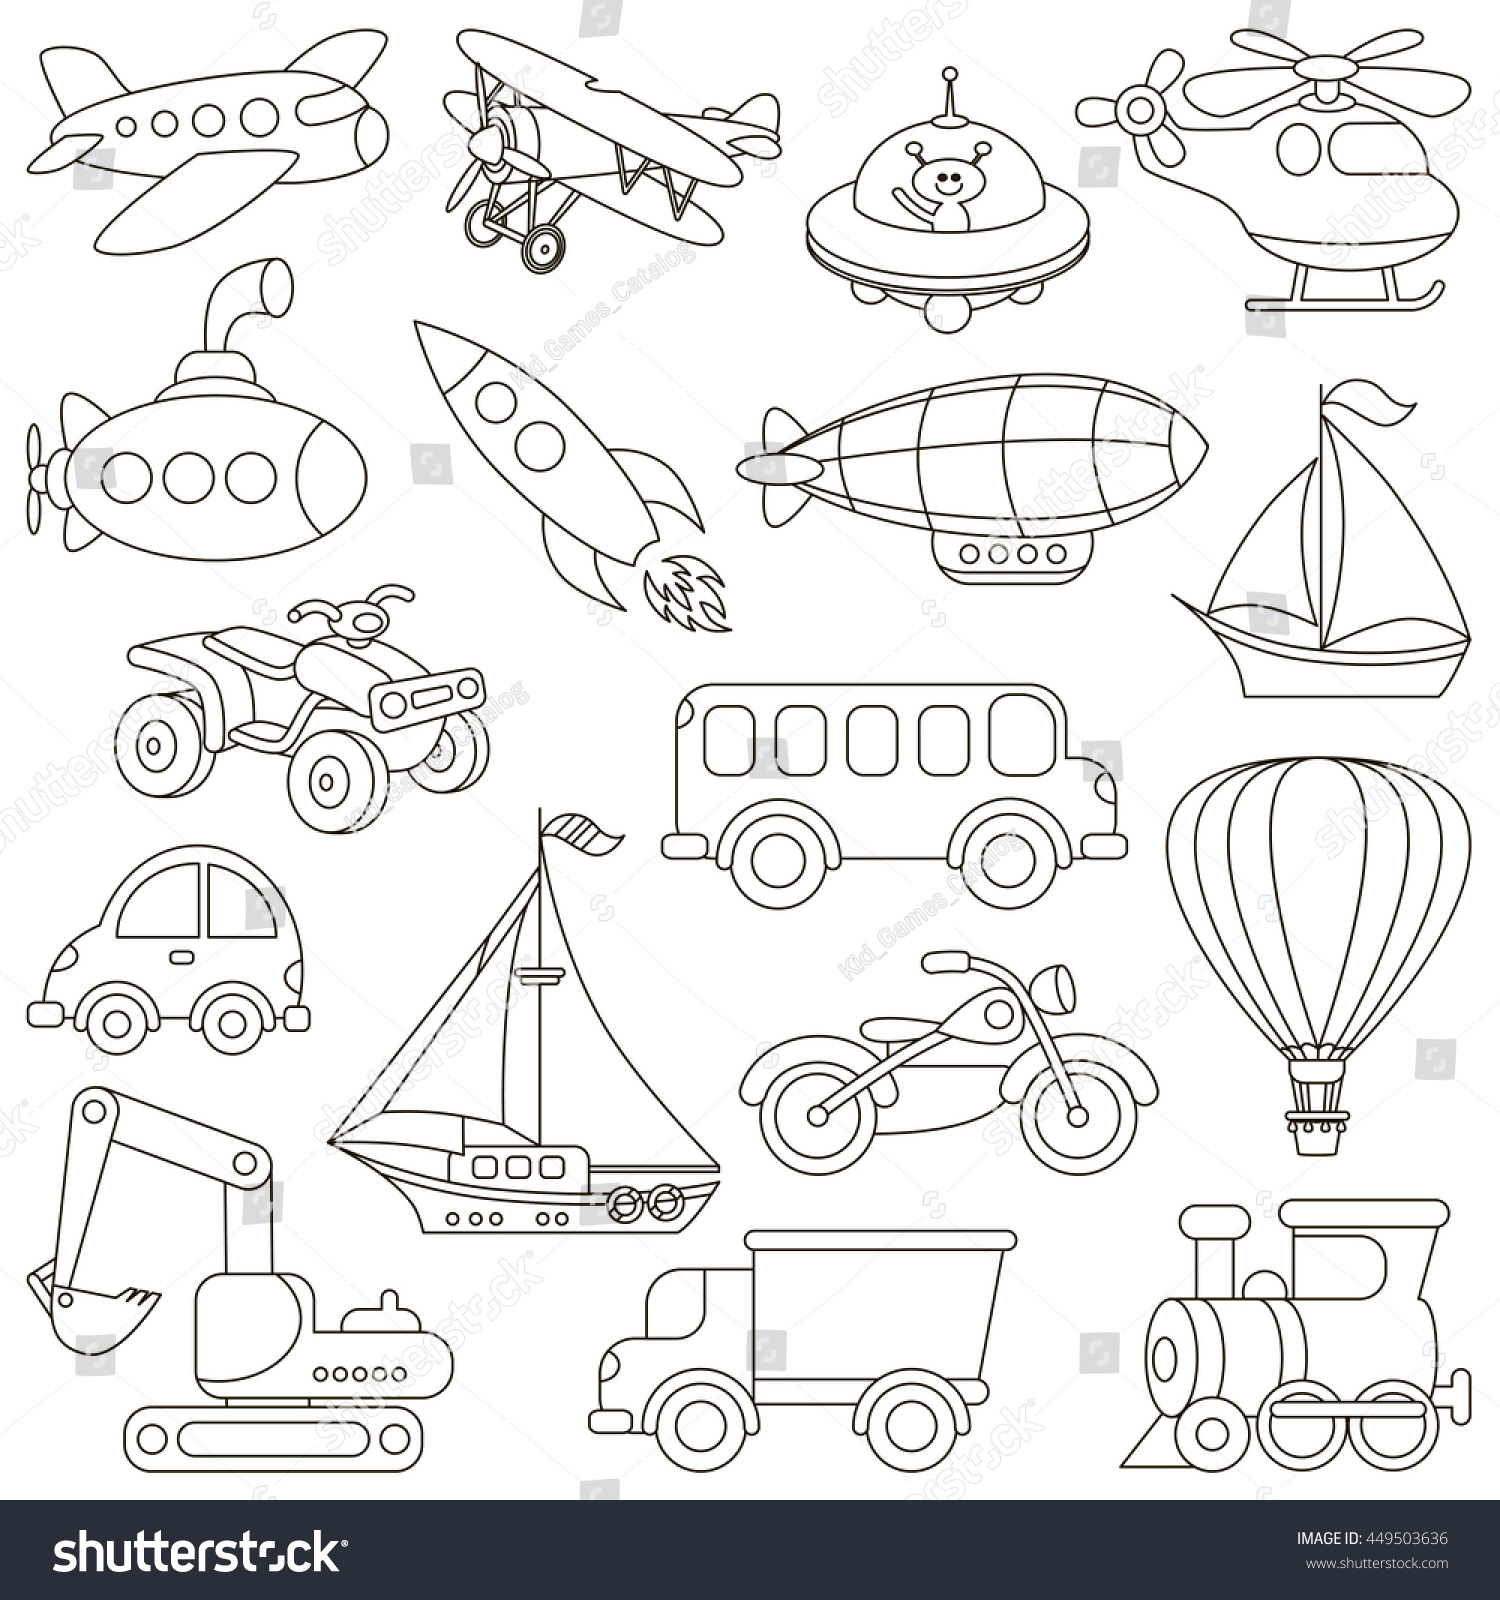 Toy Transport Set Be Colored Coloring Stock Vector Royalty Free ...